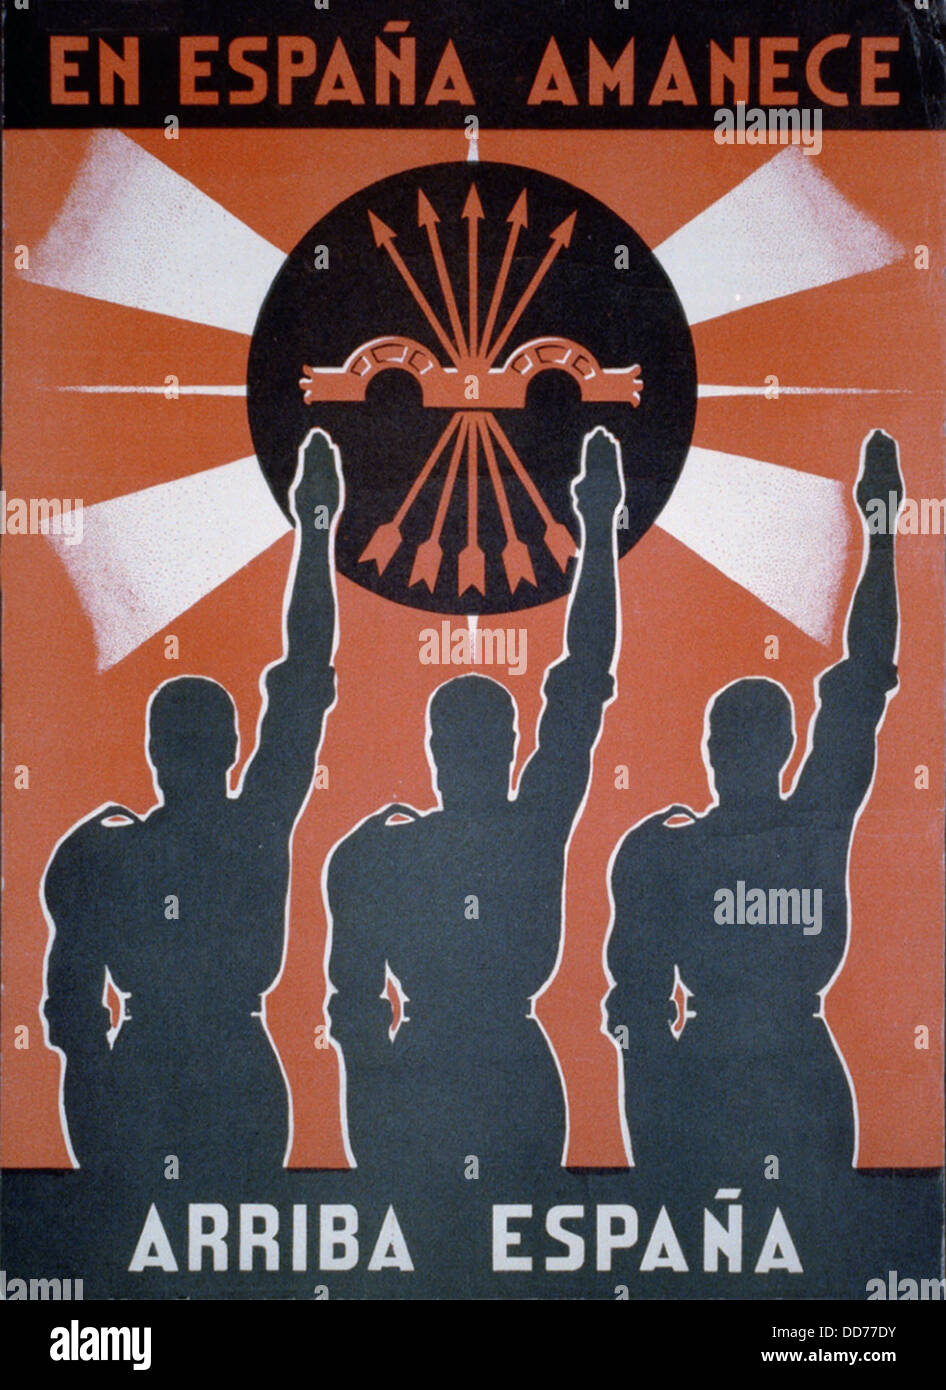 IN SPAIN IT IS DAWNING -- ARISE SPAIN. Spanish Civil War poster presenting Nationalist pro-Franco propaganda. Poster depicts Stock Photo